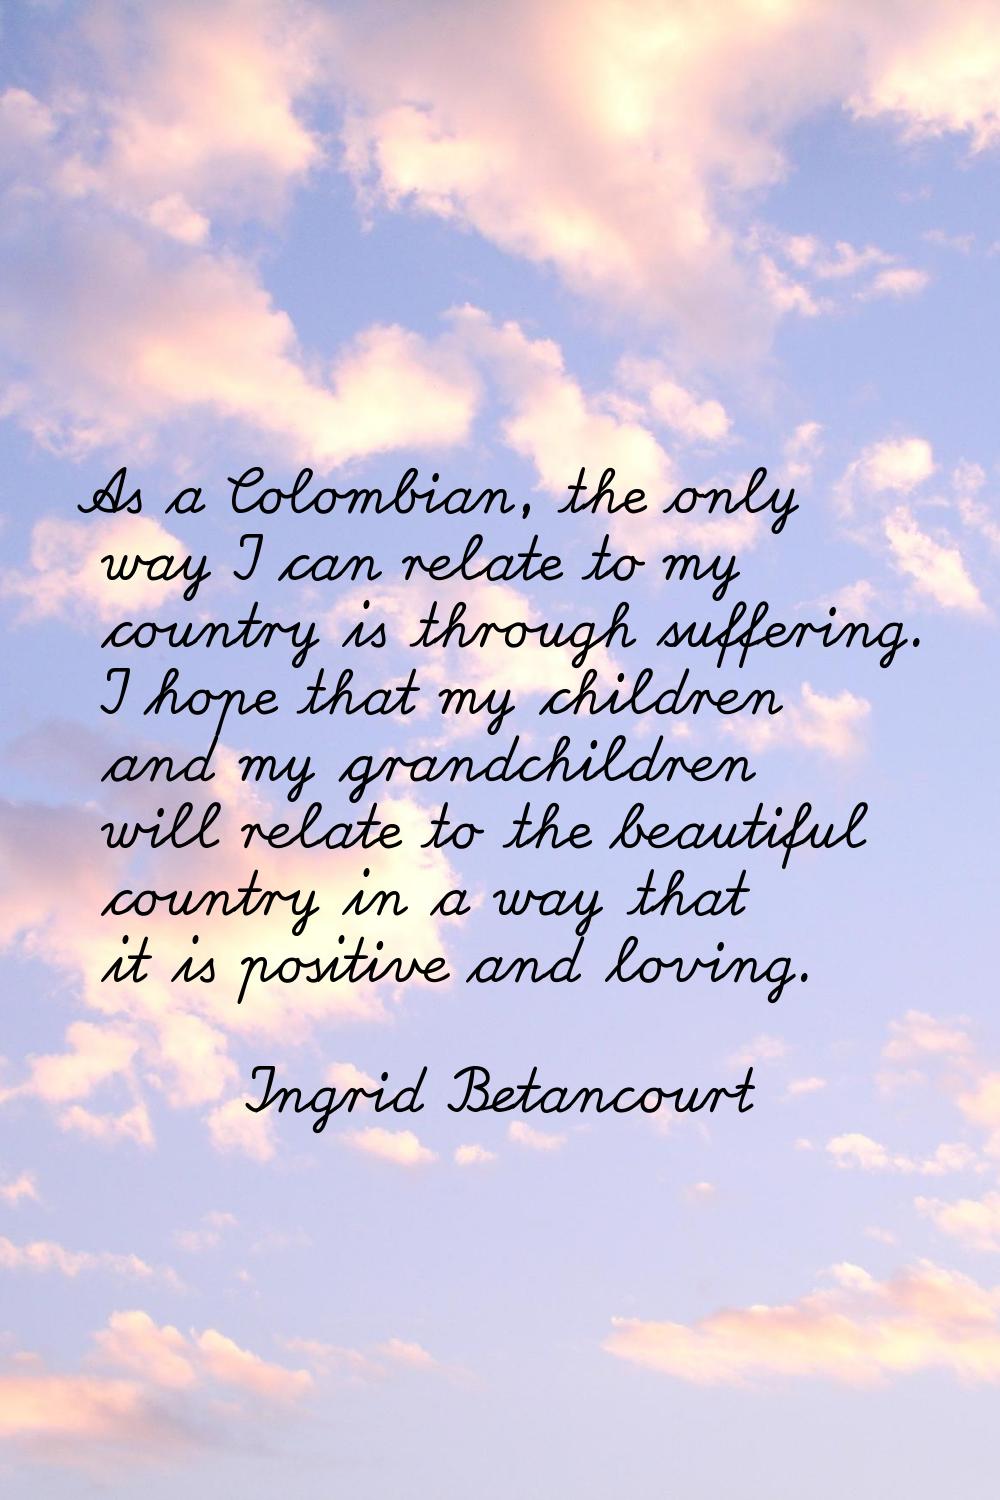 As a Colombian, the only way I can relate to my country is through suffering. I hope that my childr